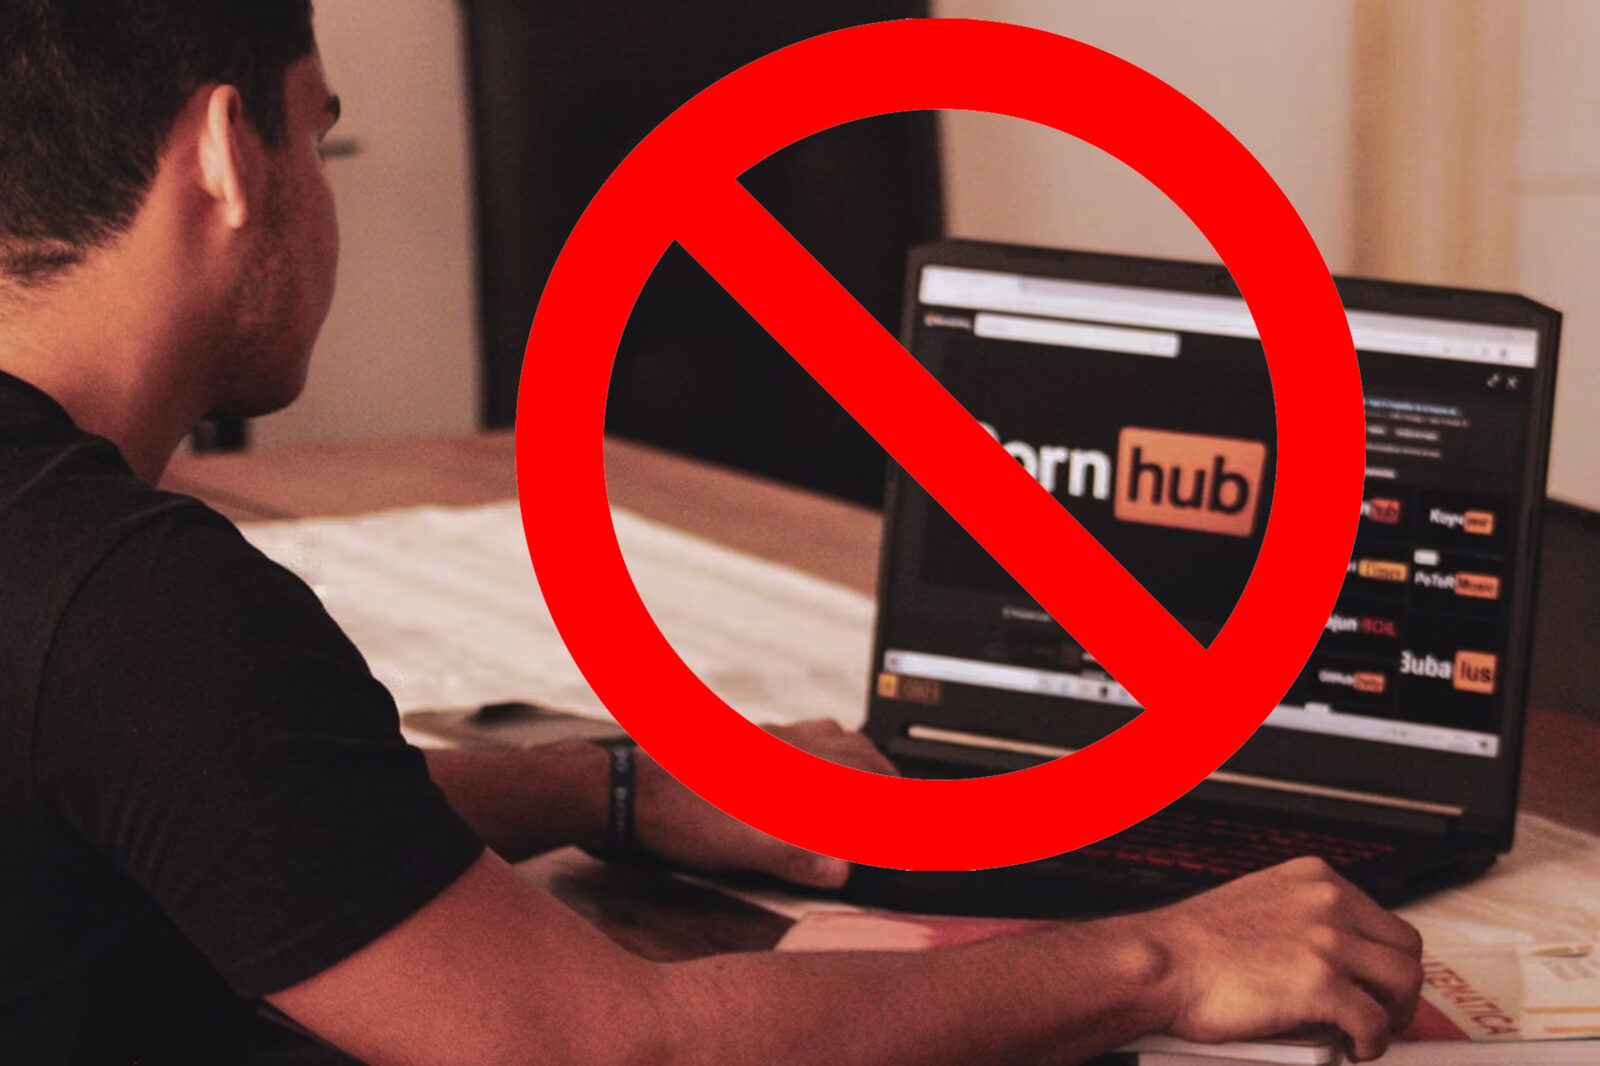 Prondhub - Pornhub Blocks Access In Utah Because of State's New Age Verification Law -  RELEVANT